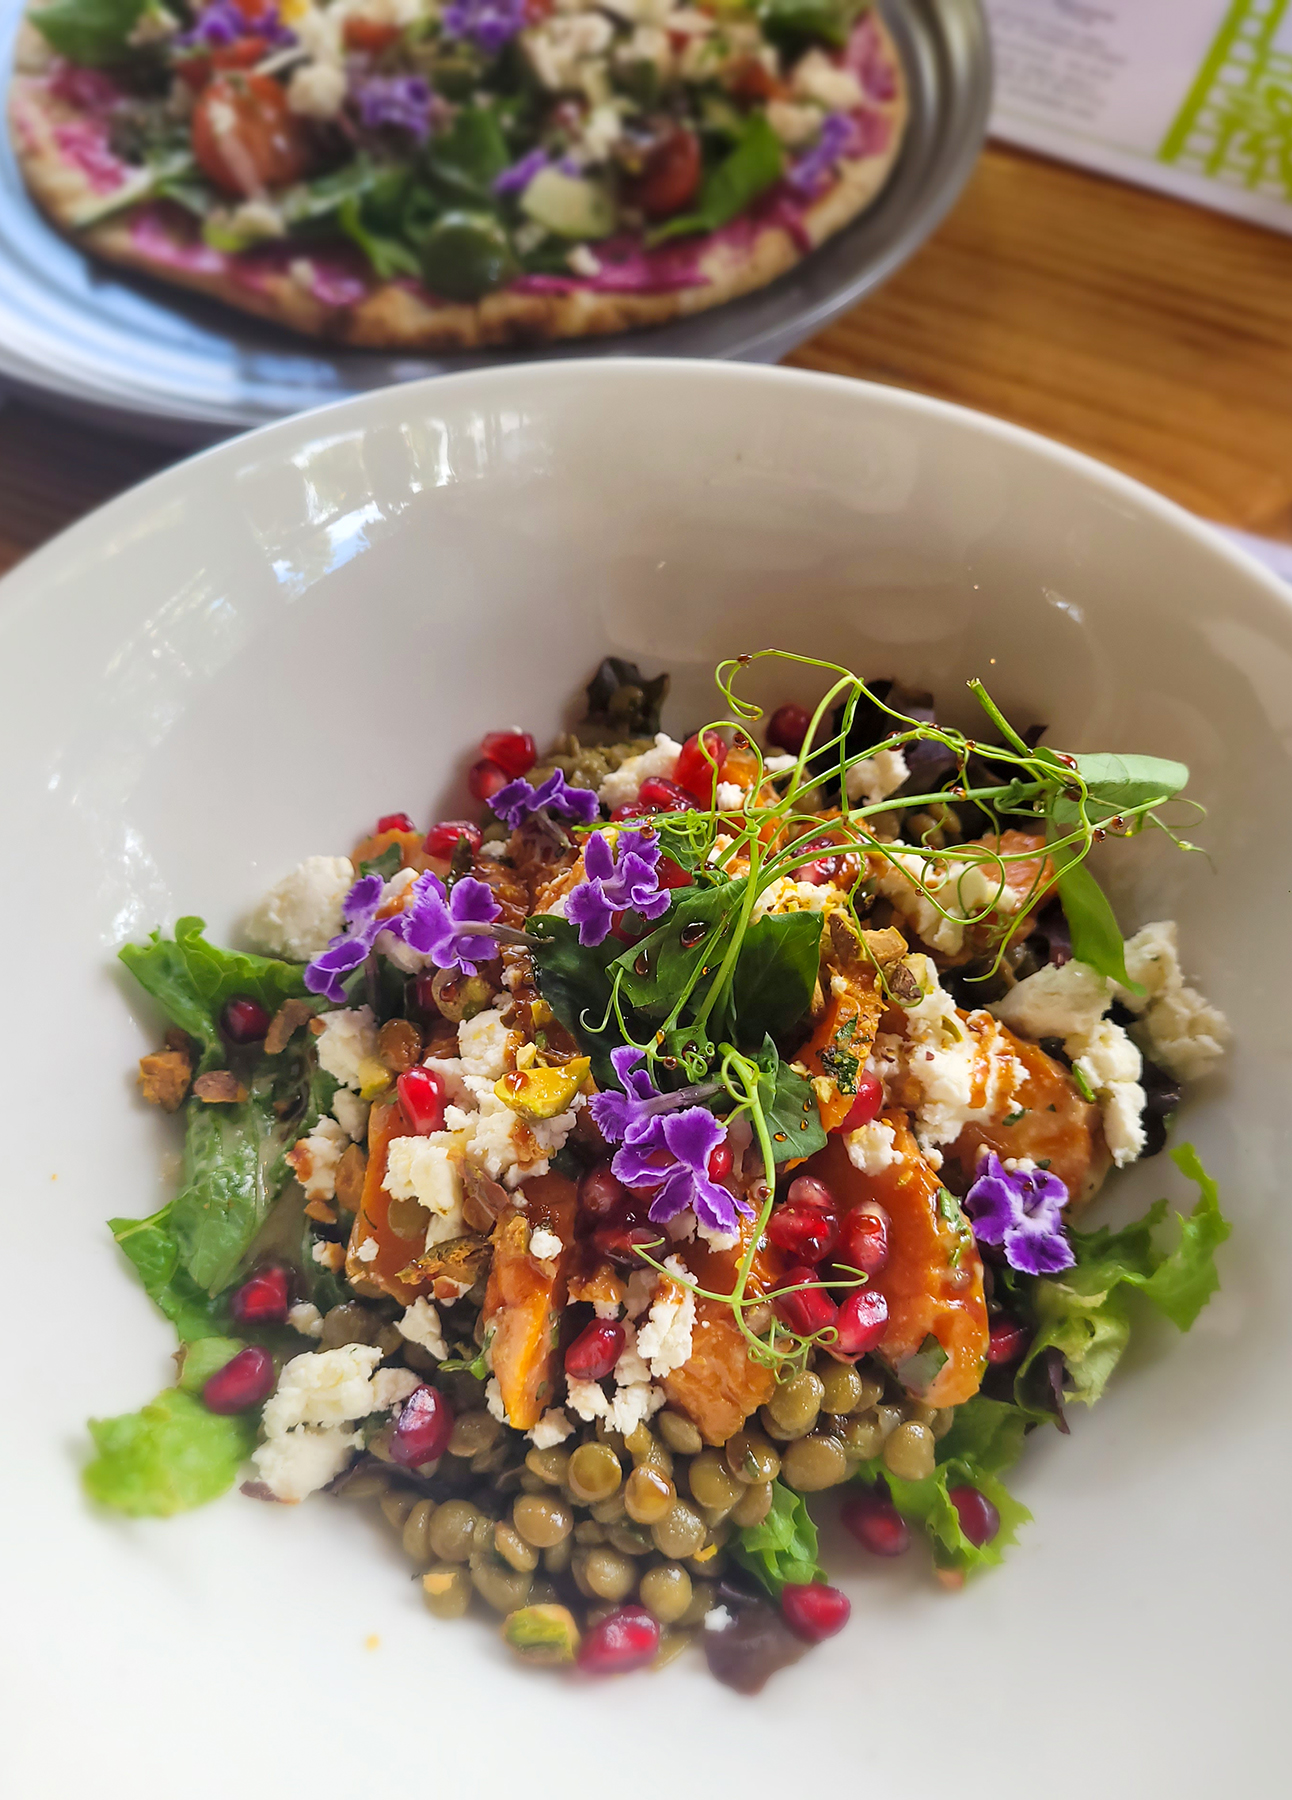 Lentil and carrot salad at Flora's Field Kitchen in Los Cabos. (Heather Irwin/The Press Democrat)